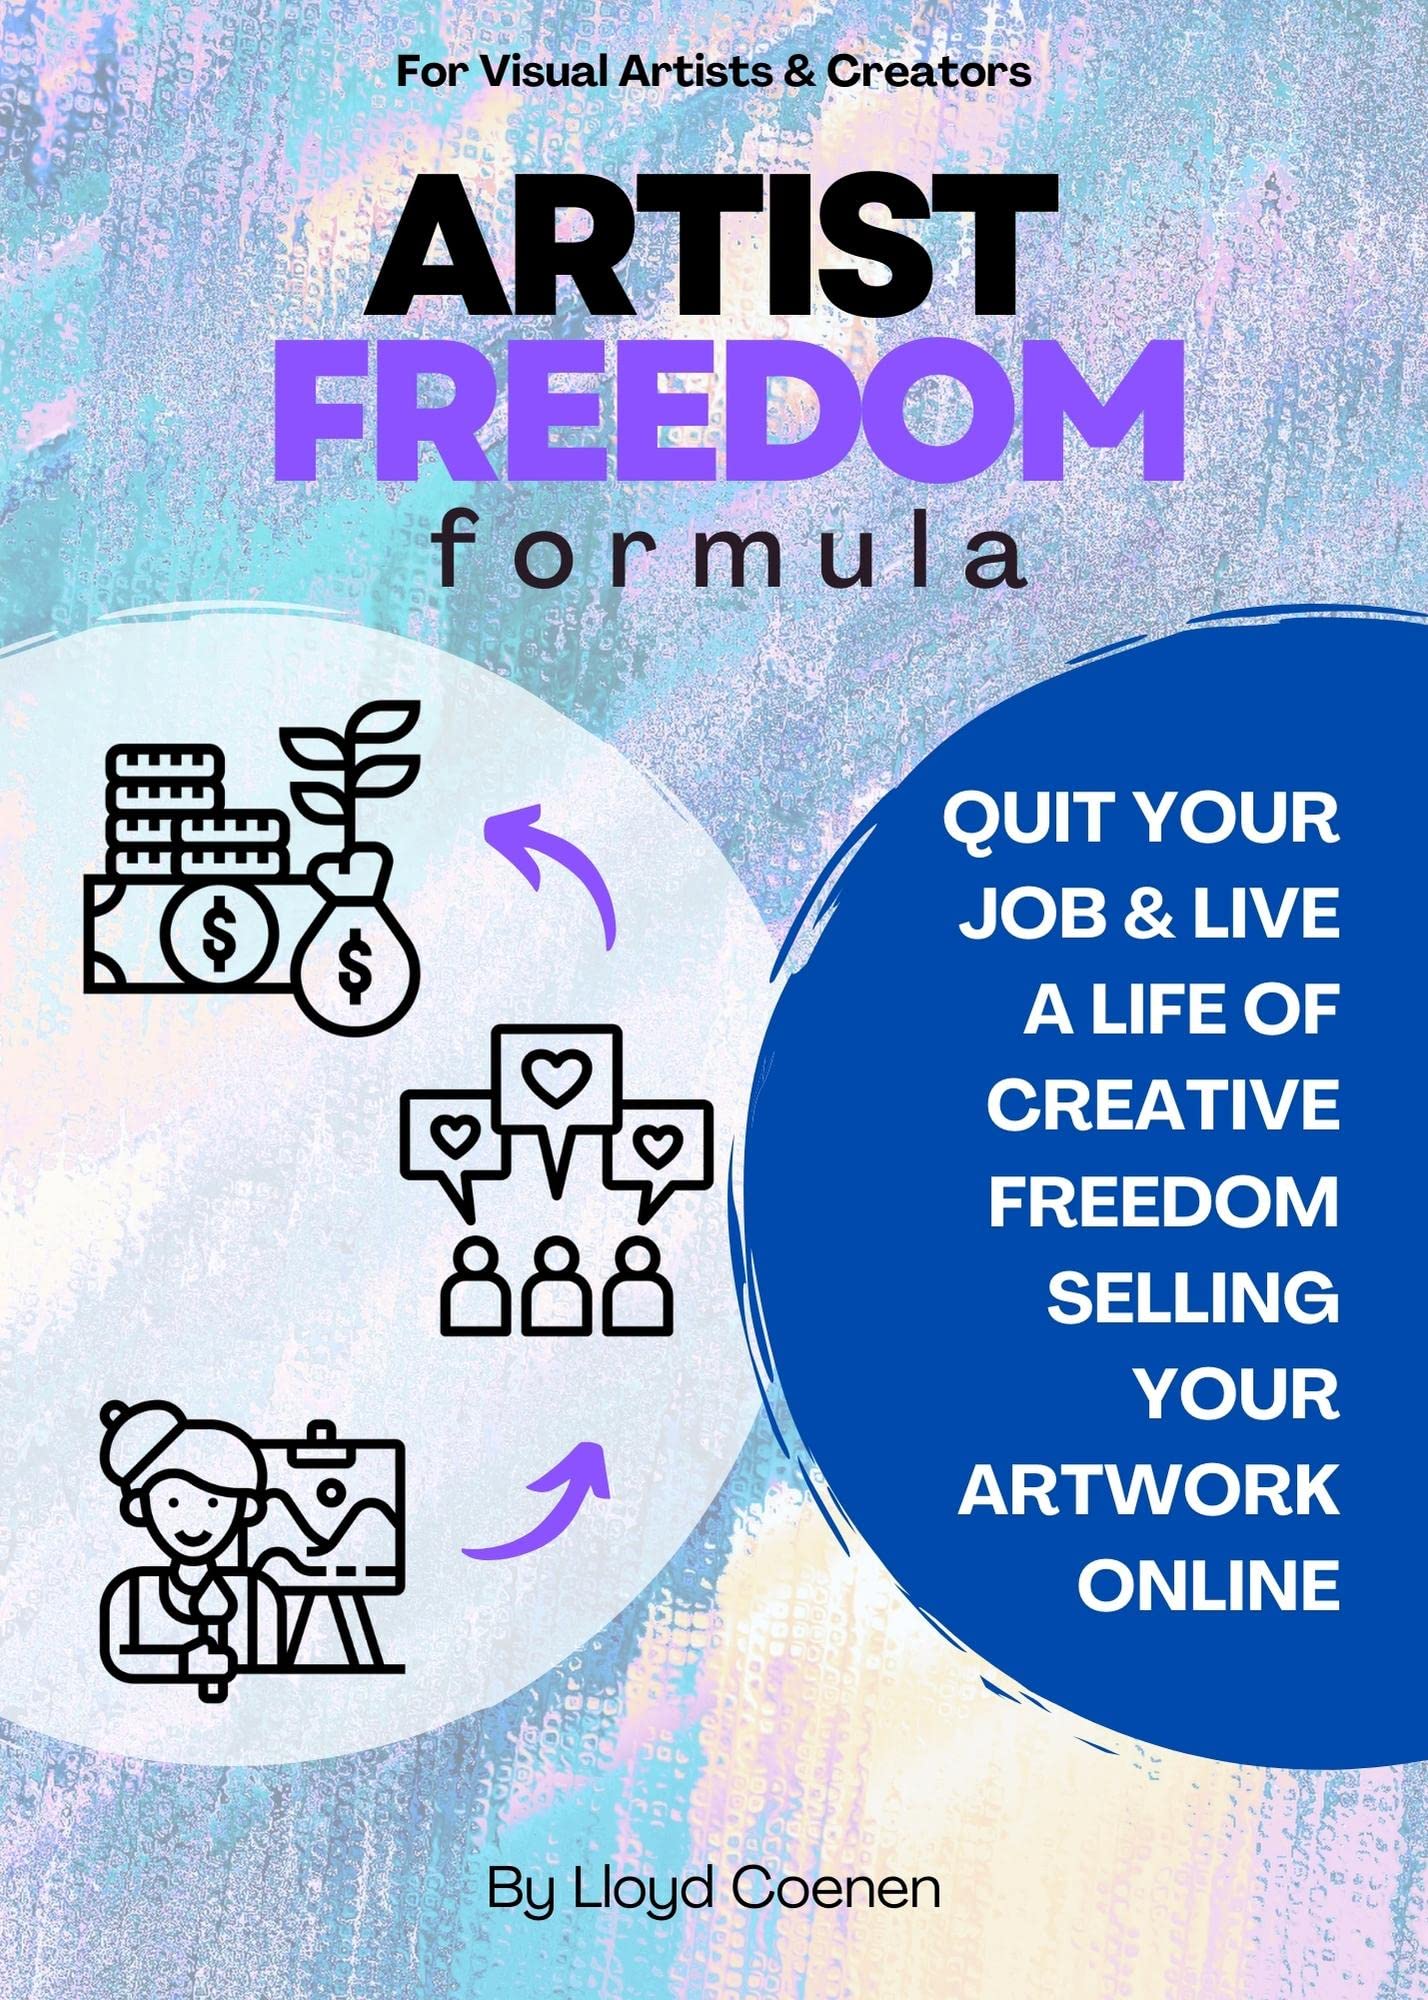 THE ARTIST FREEDOM FORMULA: QUIT YOUR JOB & LIVE A LIFE OF CREATIVE FREEDOM SELLING YOUR ARTWORK ONLINE